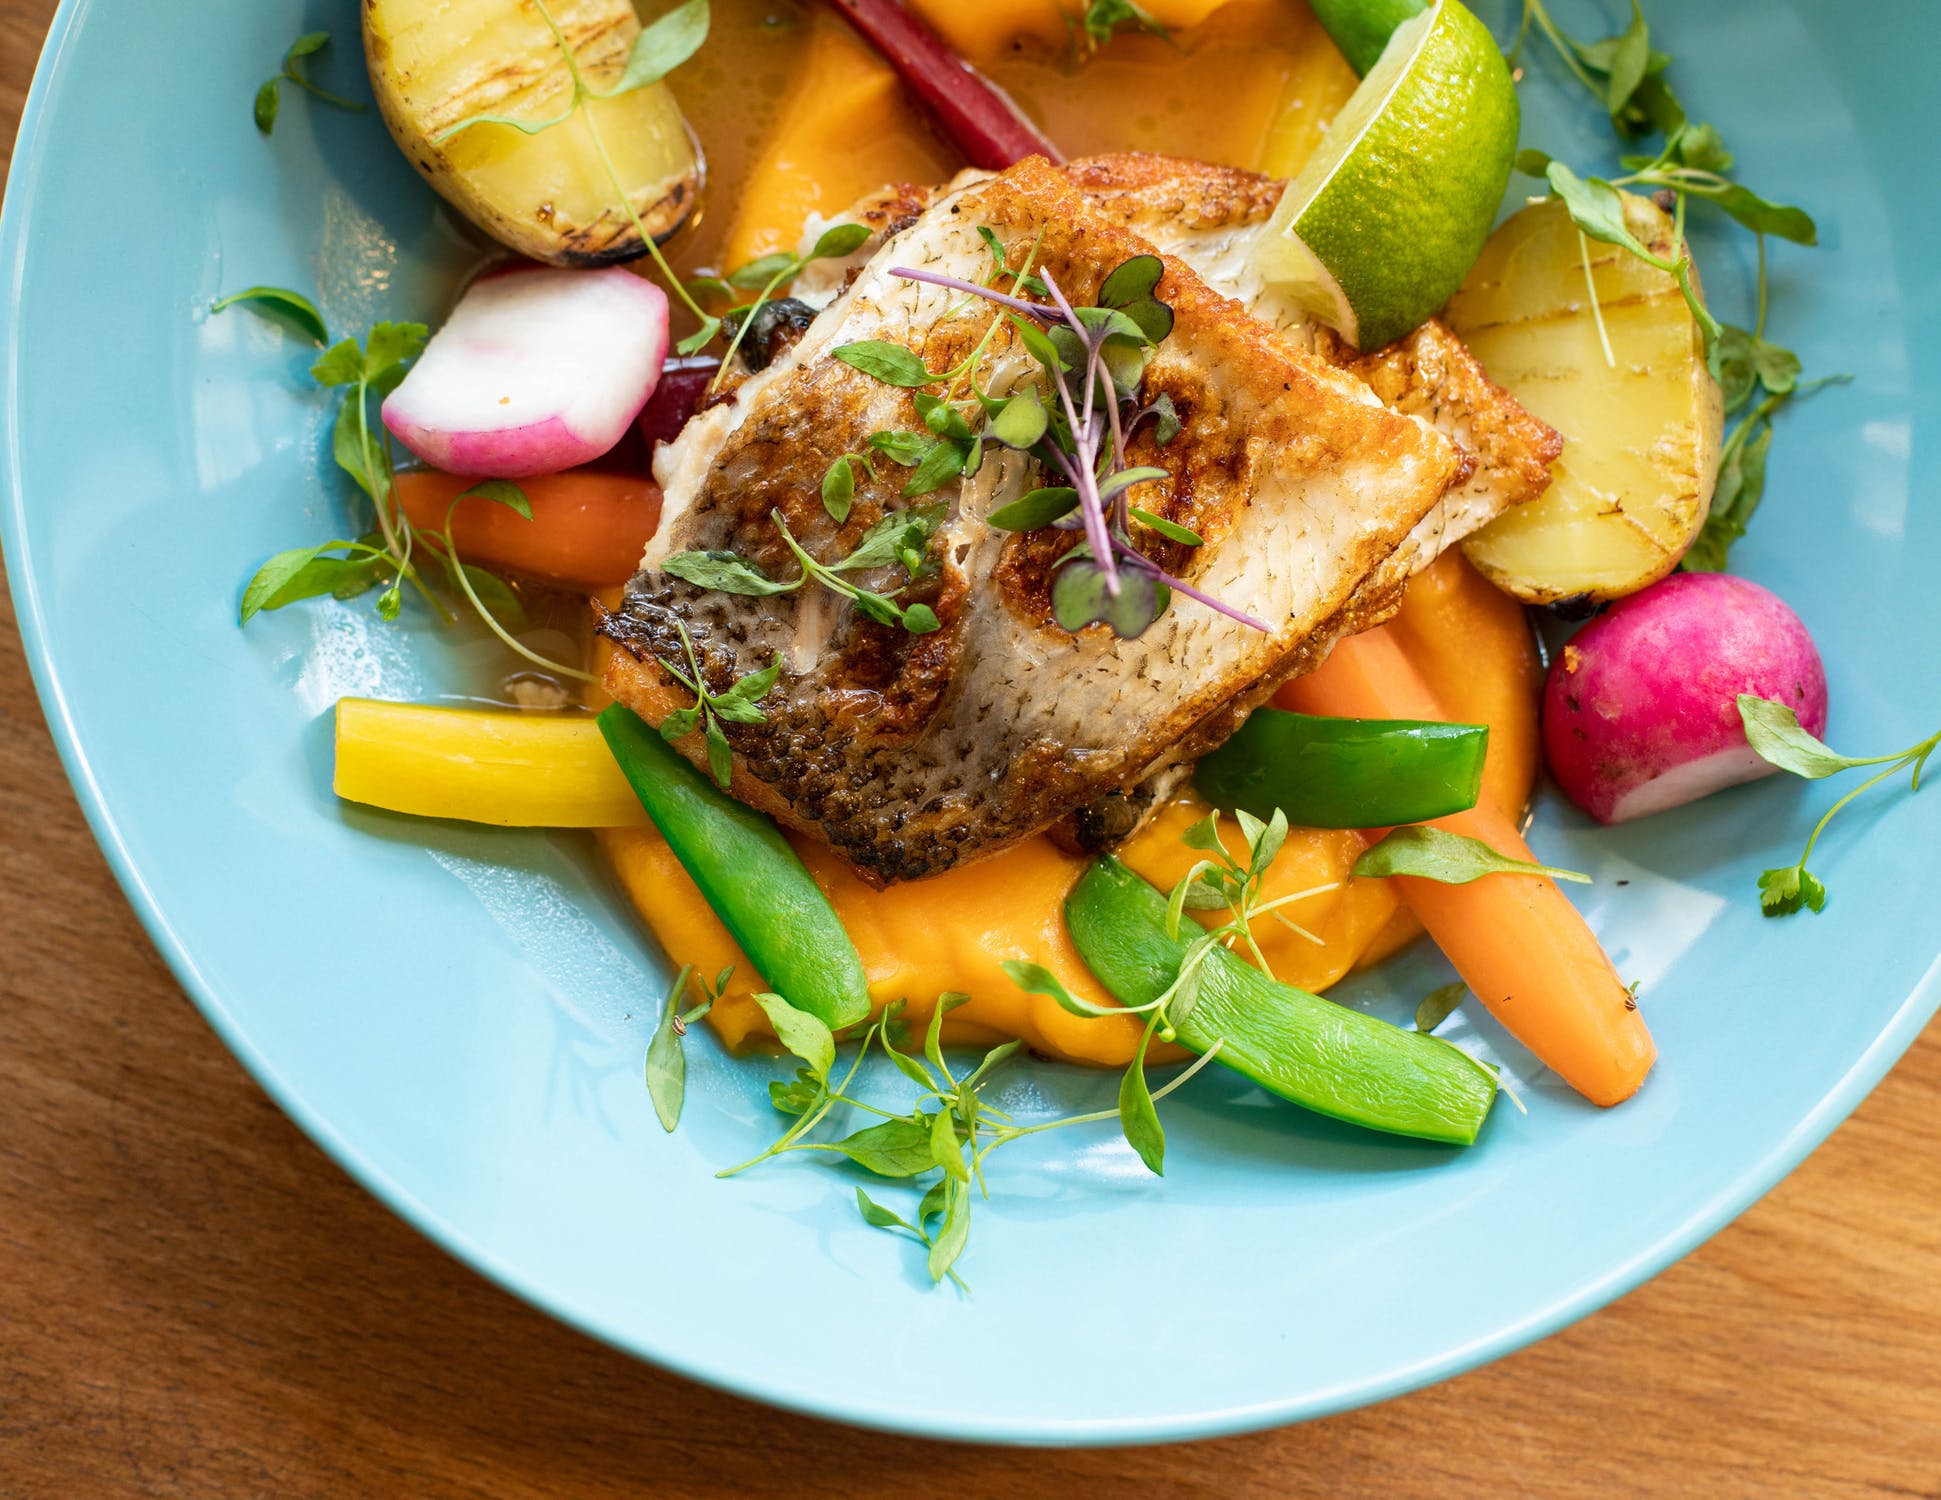 Featured image for “Pan Fried Pickerel with Roasted Seasonal Vegetables”